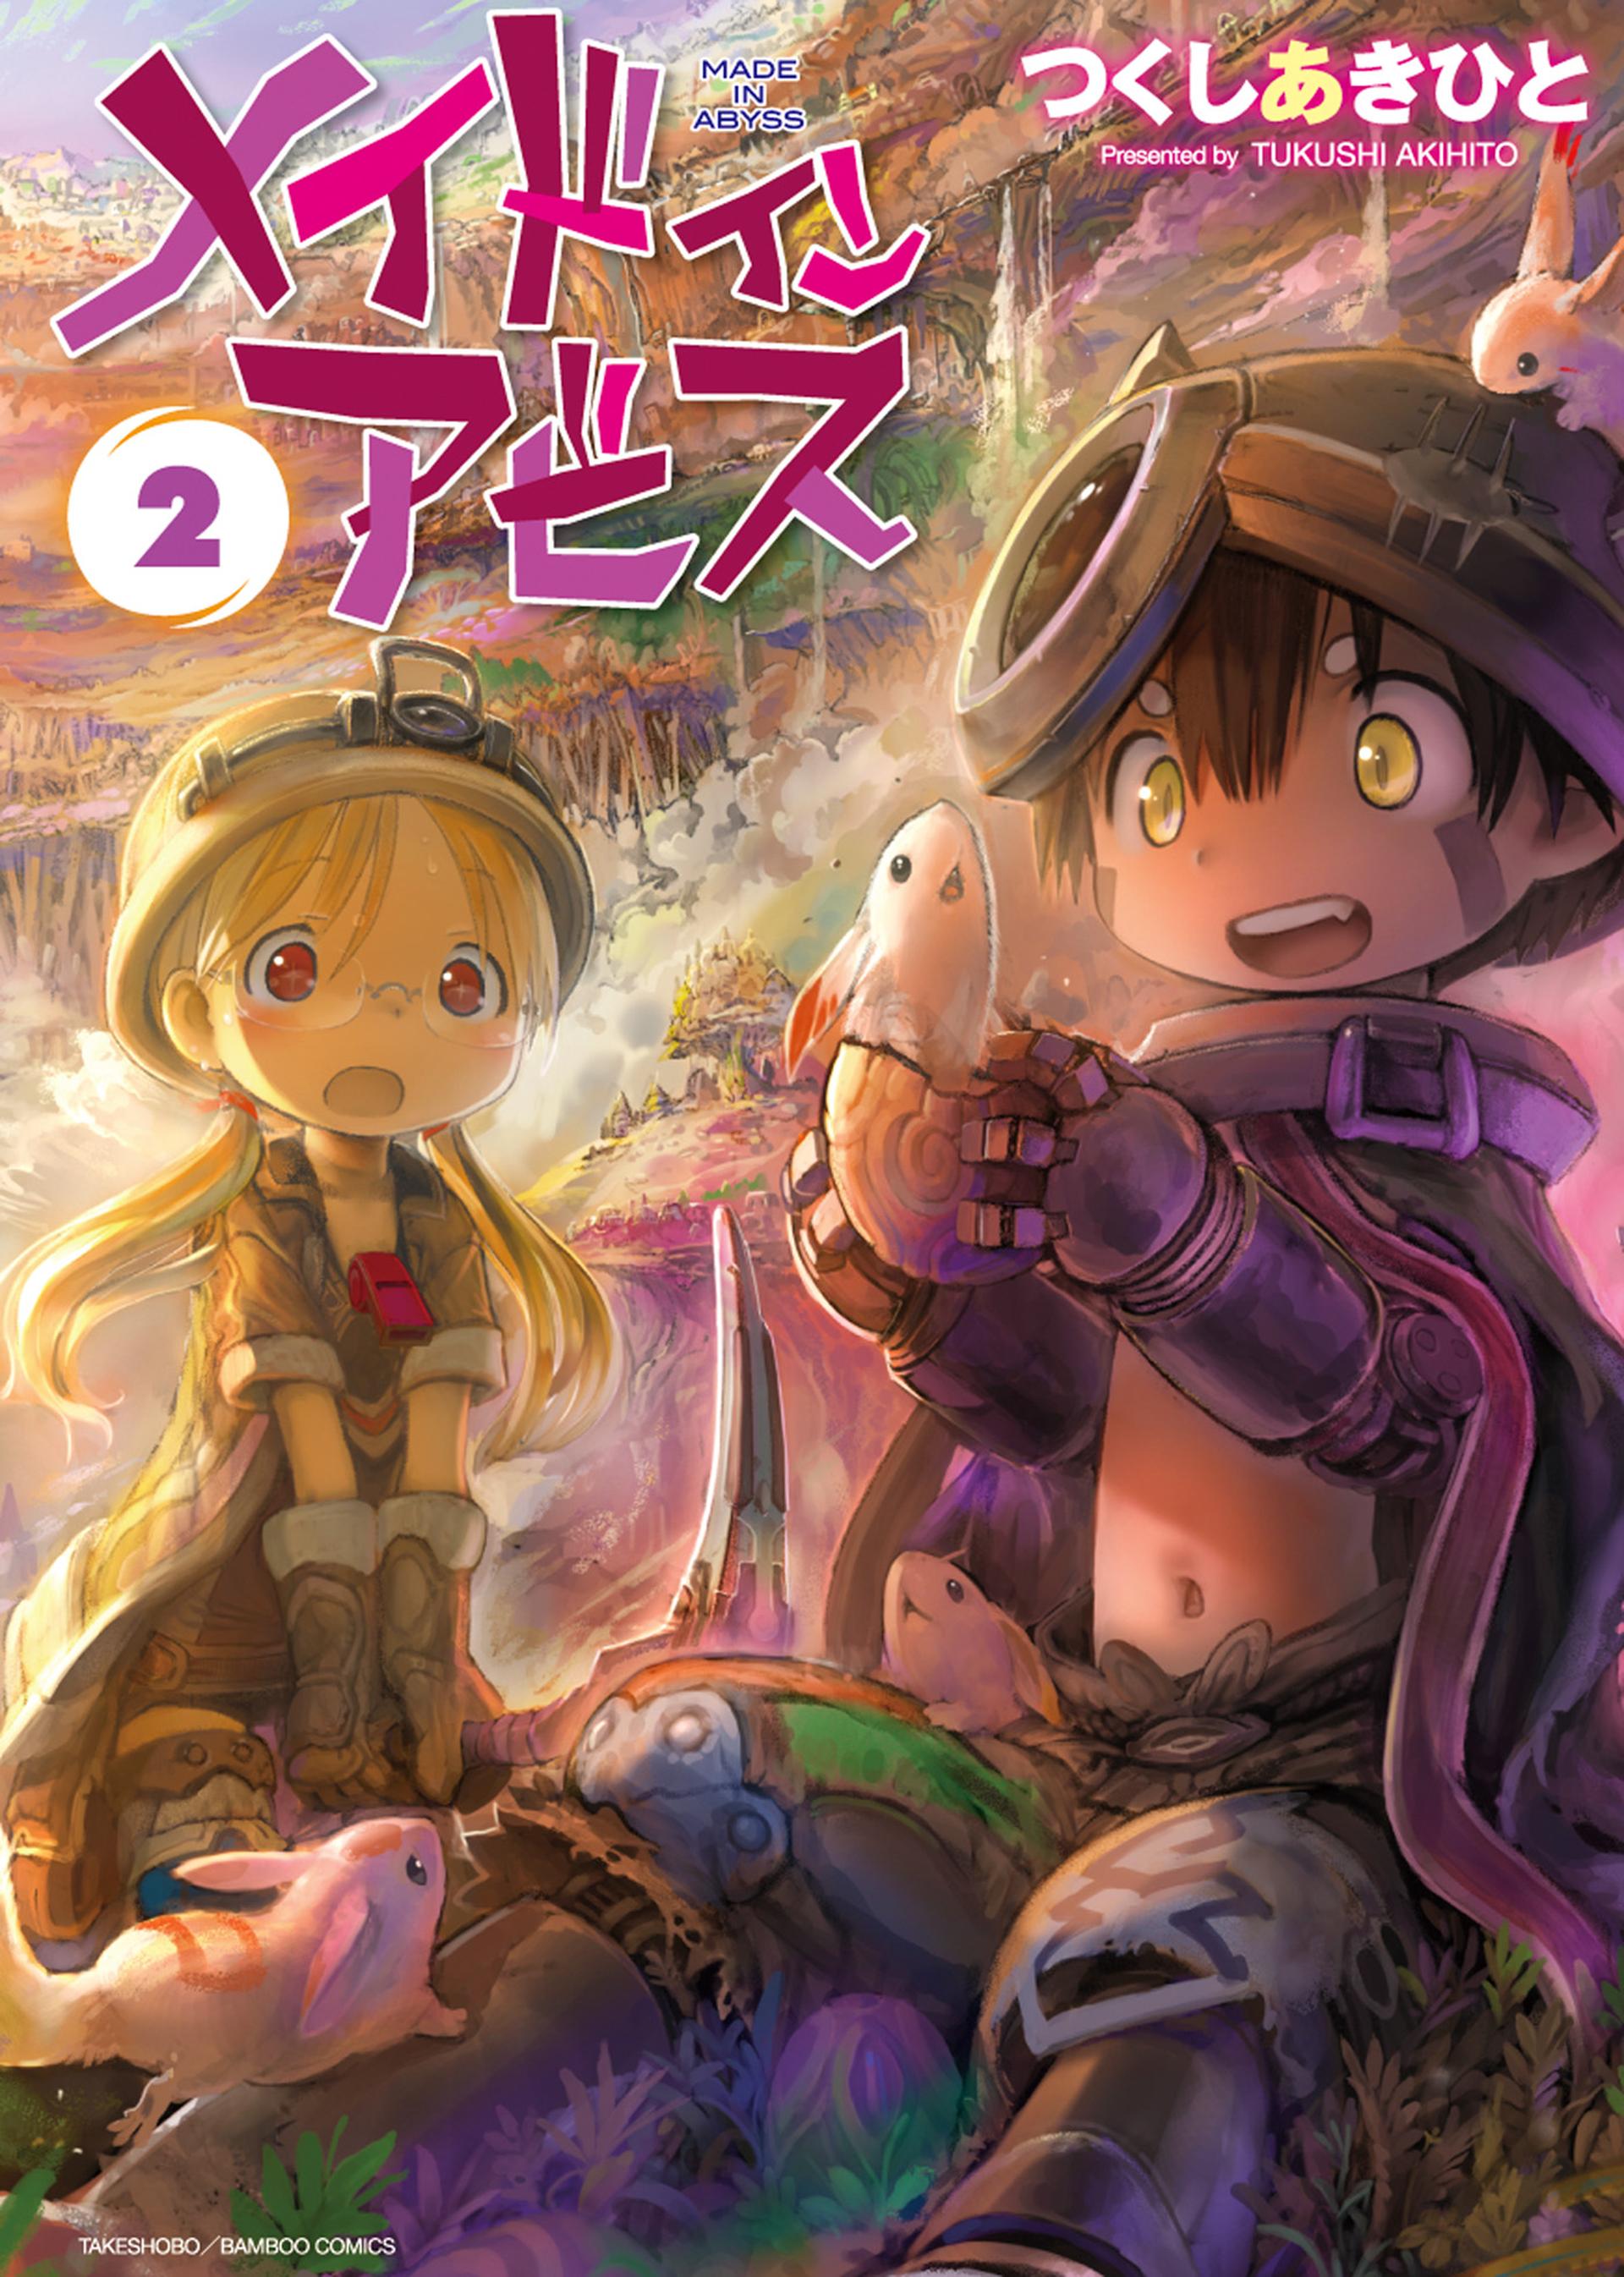 Made in Abyss - MangaDex